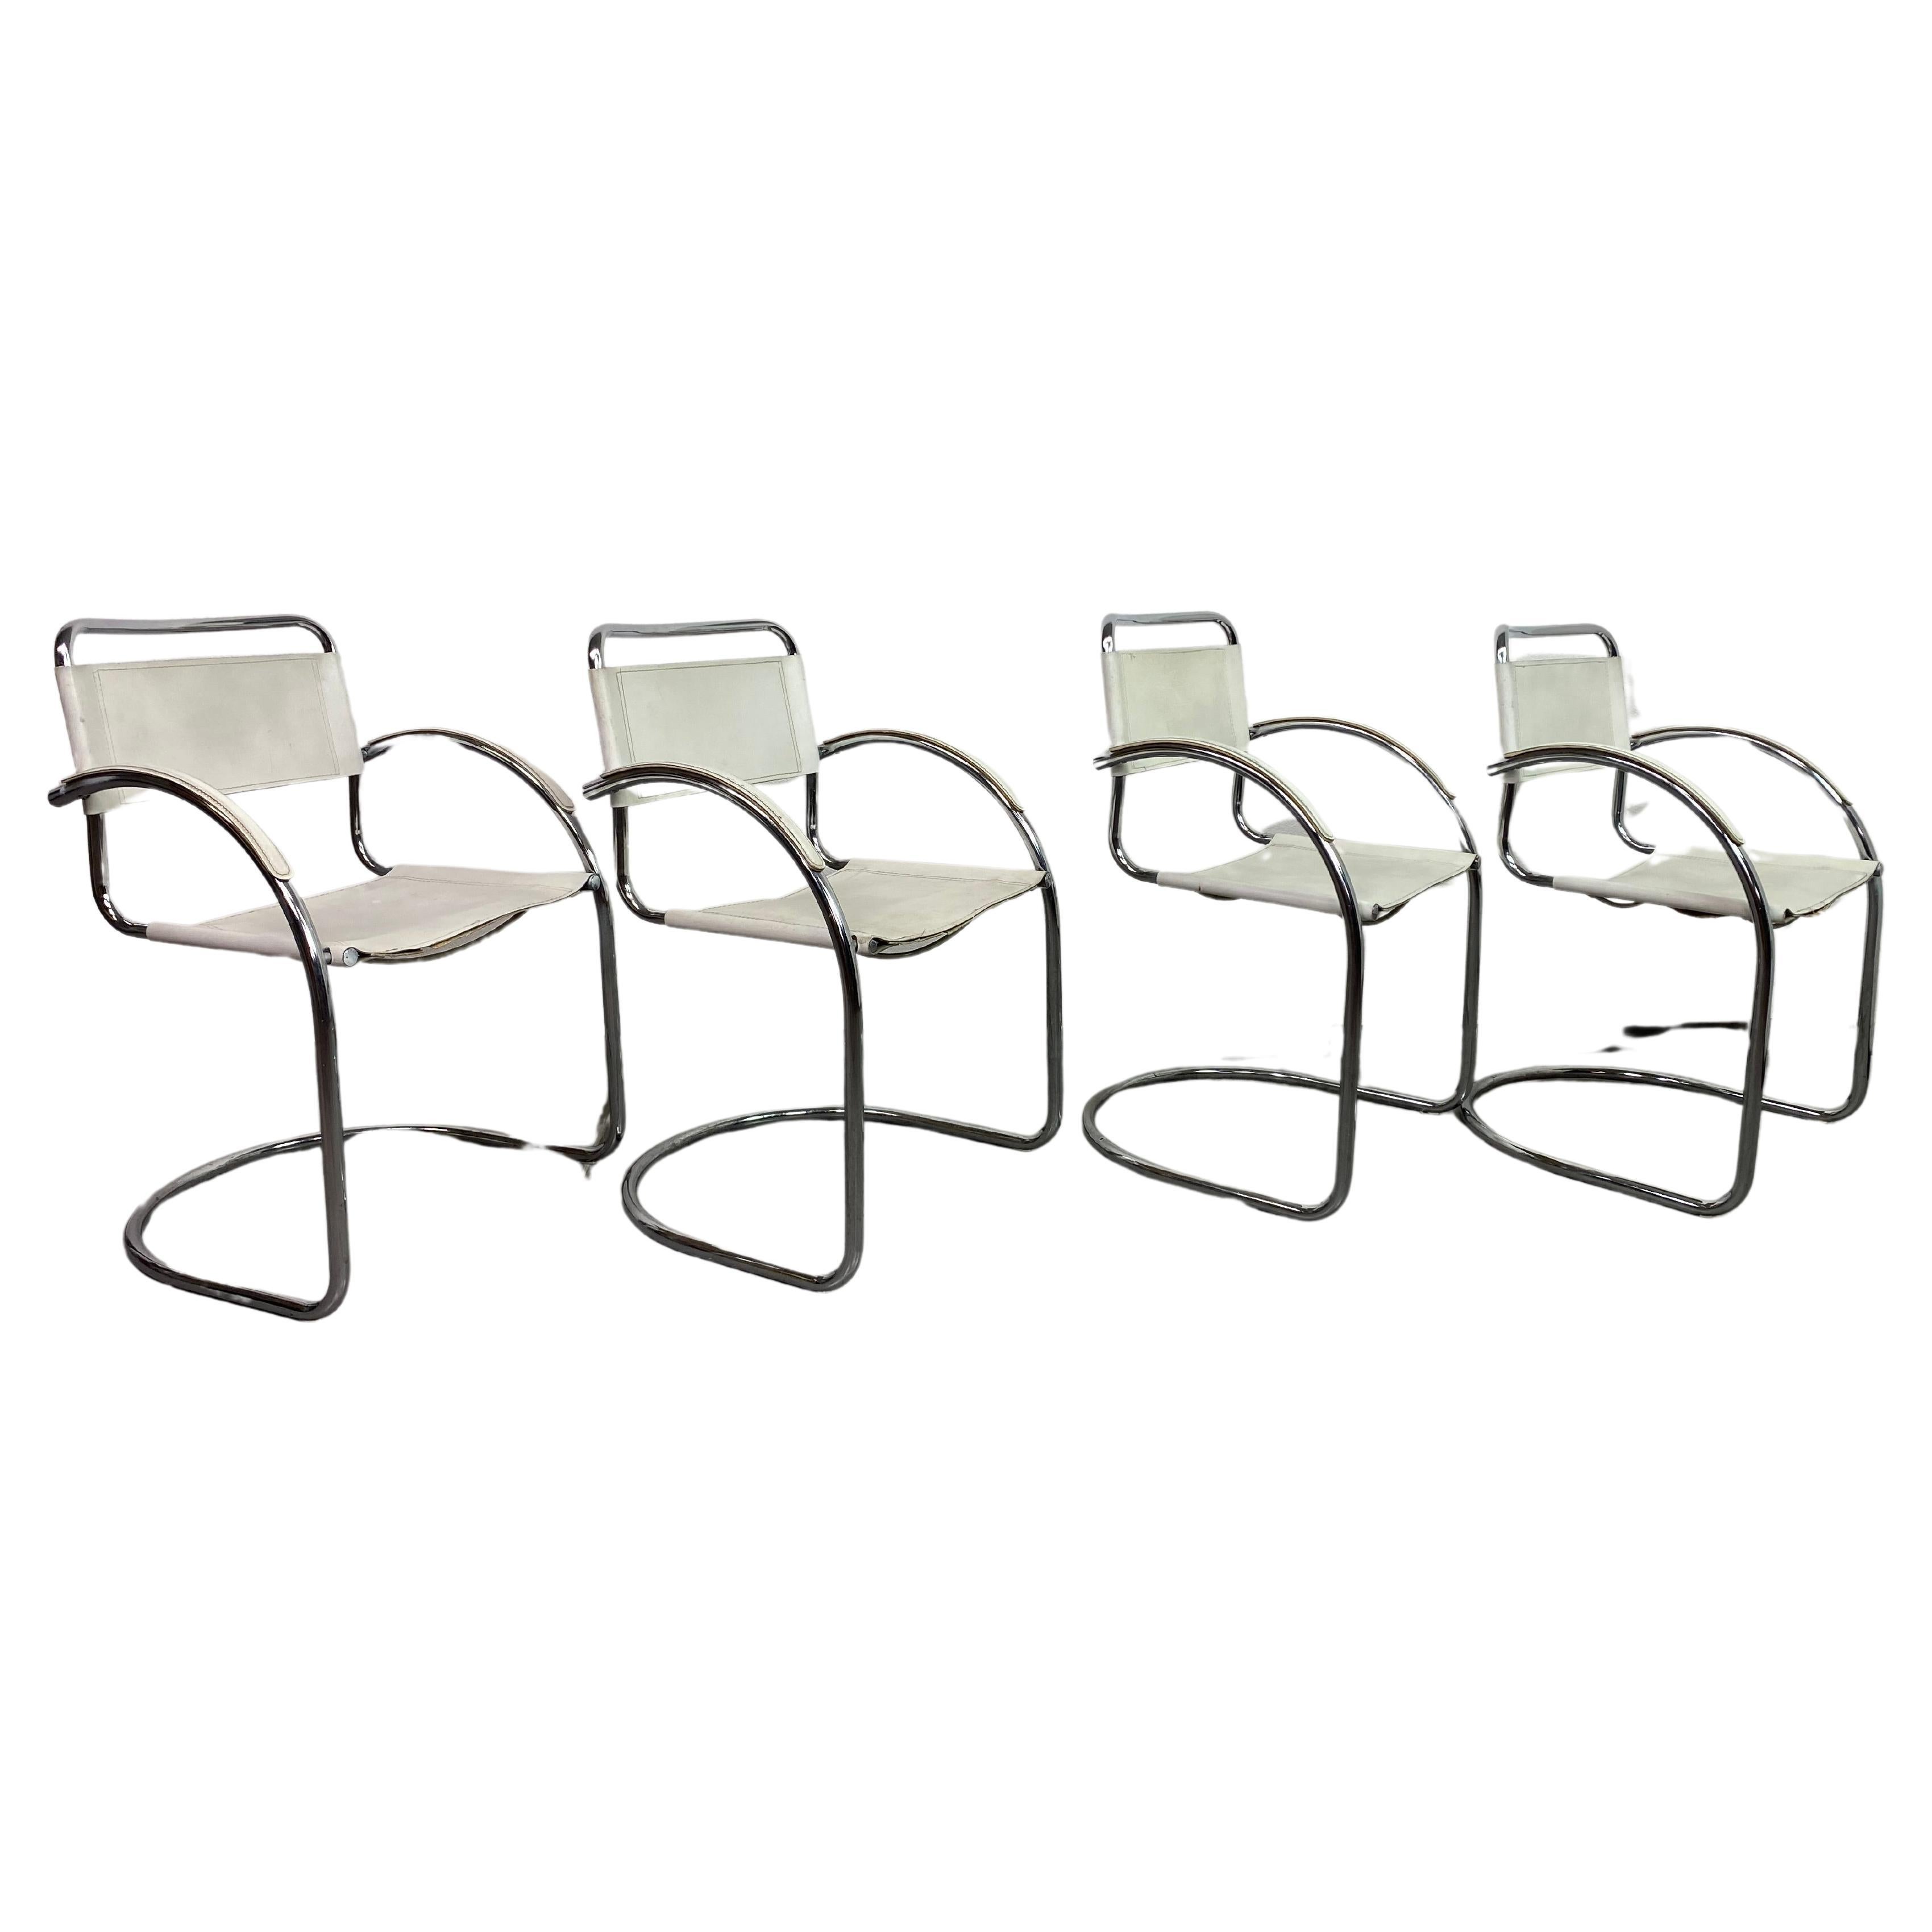 Tubular steel dining chairs For Sale